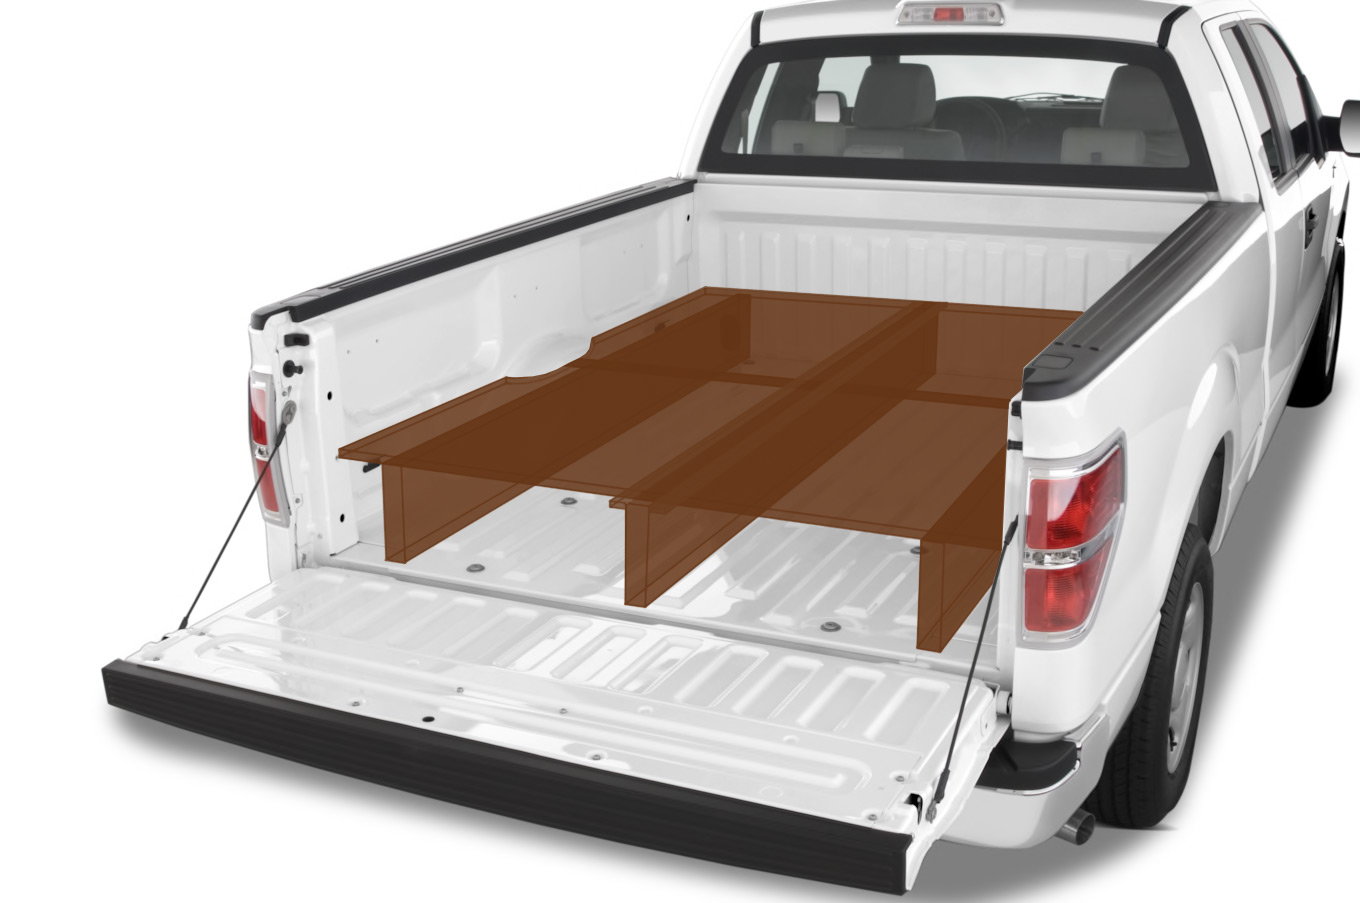 F 150 Sleeping Platform In Truck Bed Leer Shell On Top Ford F150